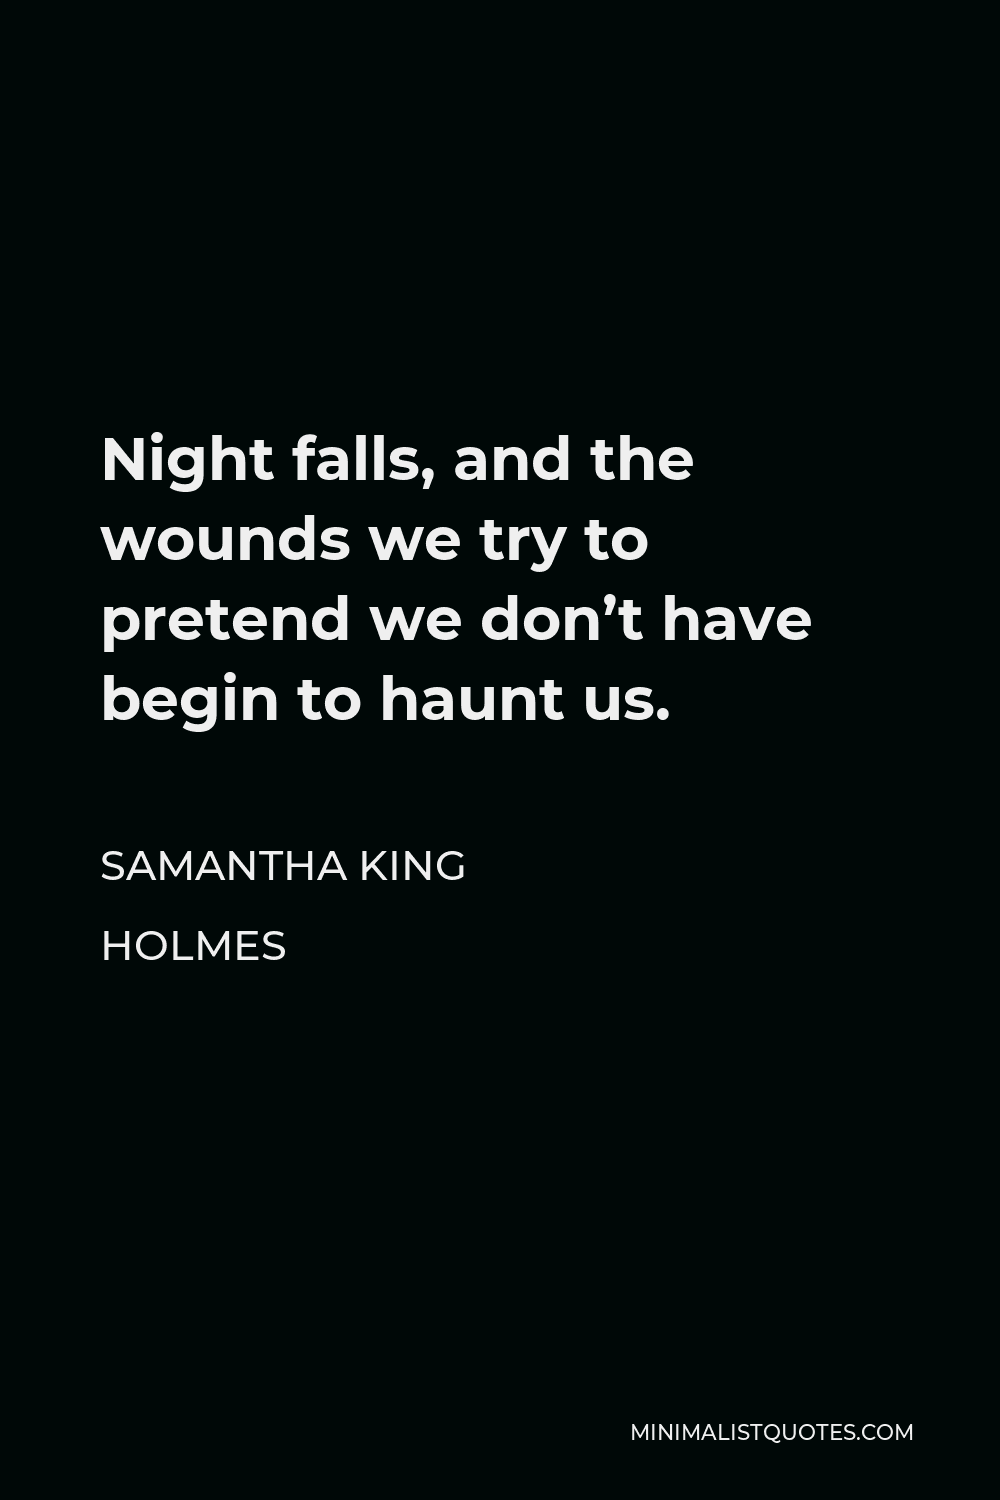 Samantha King Holmes Quote - Night falls, and the wounds we try to pretend we don’t have begin to haunt us.